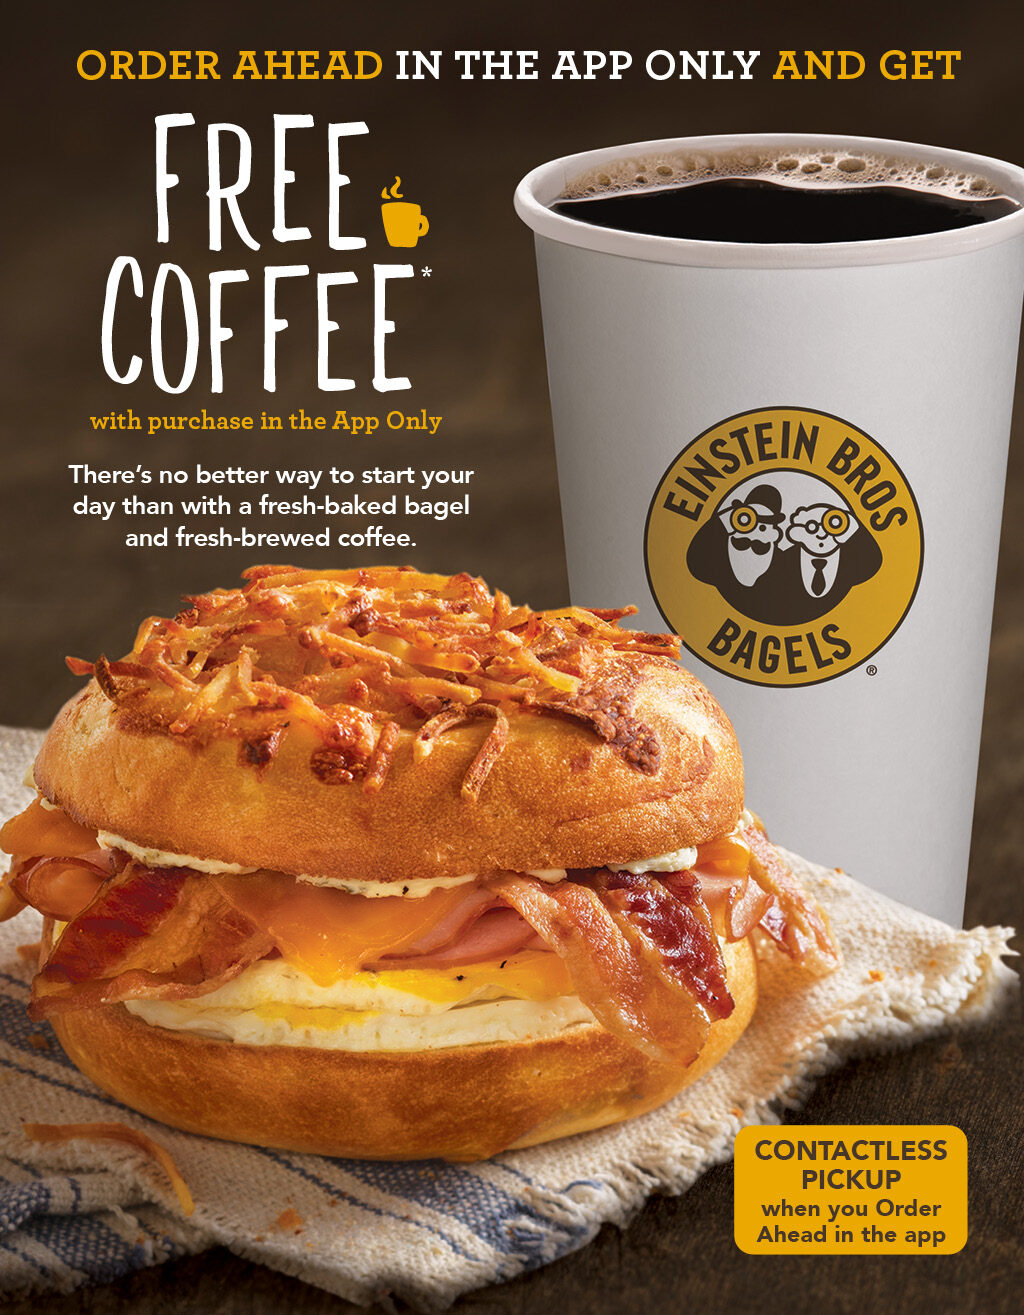 ROTATING SLIDER: Free Coffee, Any Size, on any orders purchased through the app!